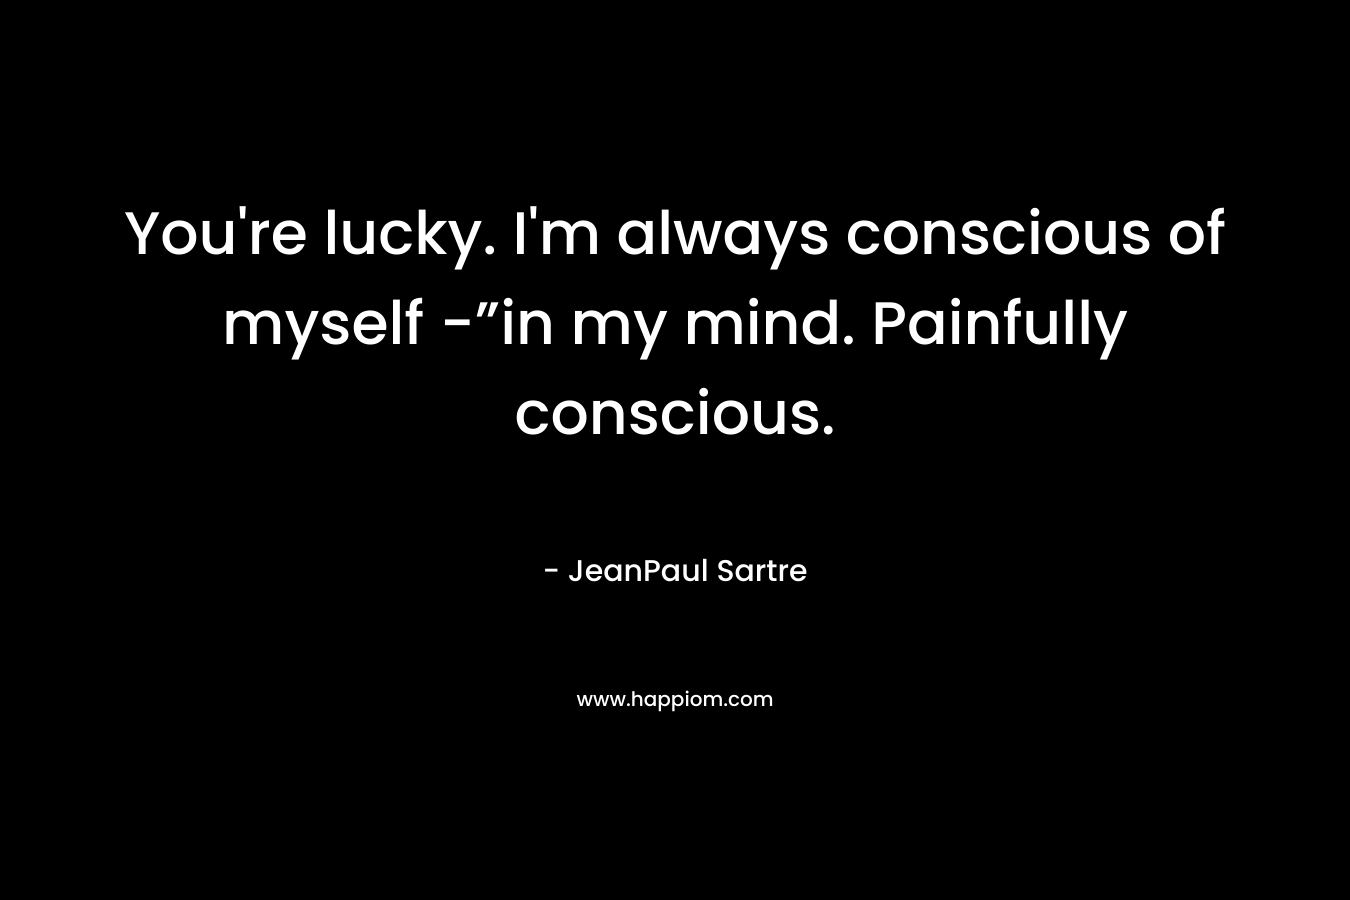 You're lucky. I'm always conscious of myself -”in my mind. Painfully conscious.